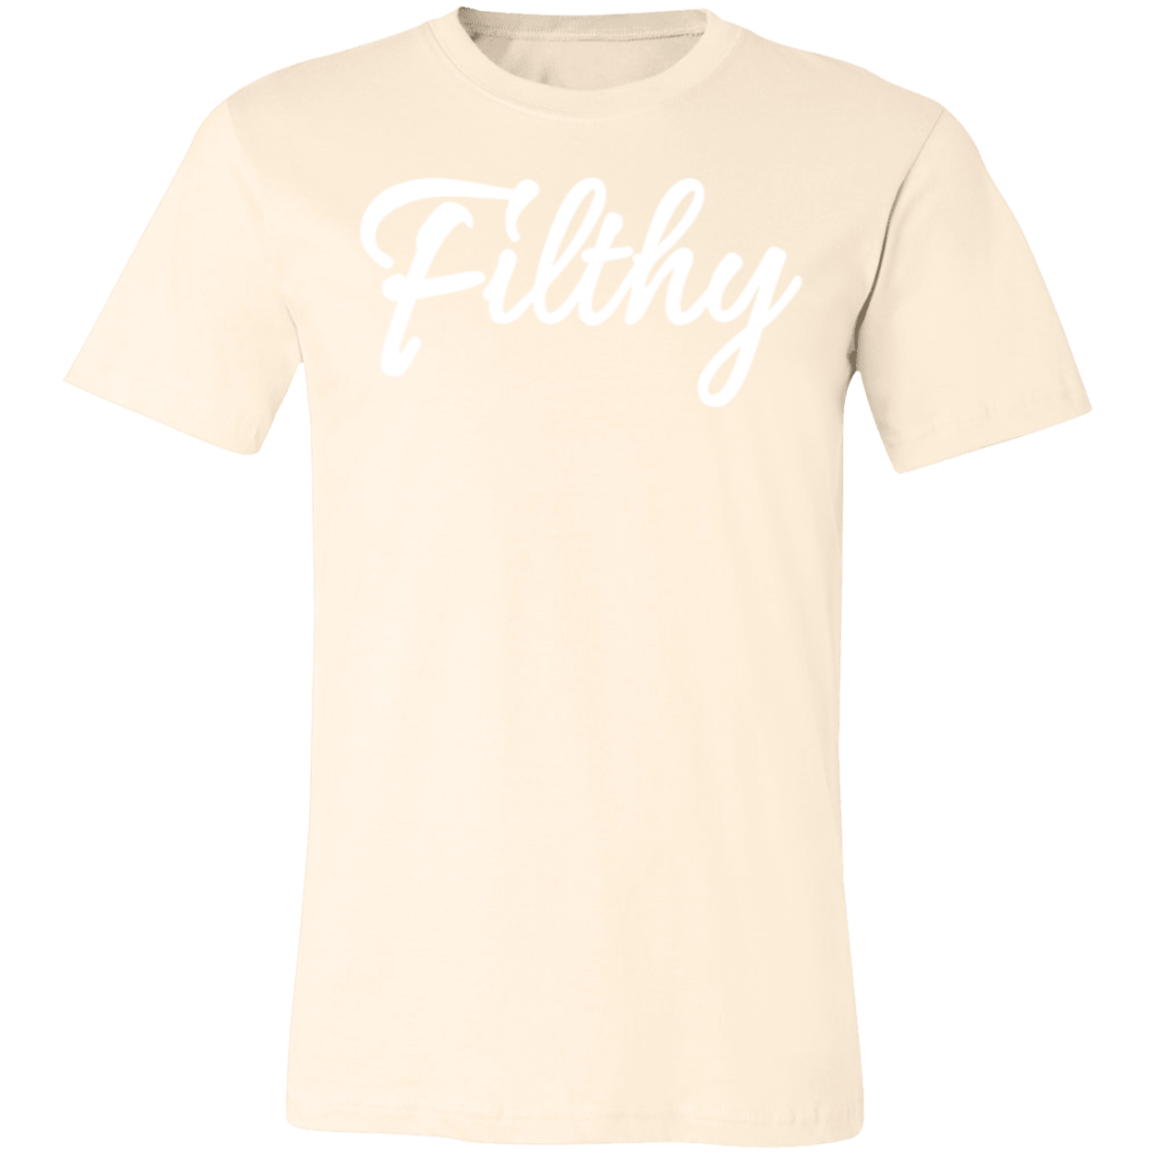 Filthy Premium Women's Tee - Game Day Getup